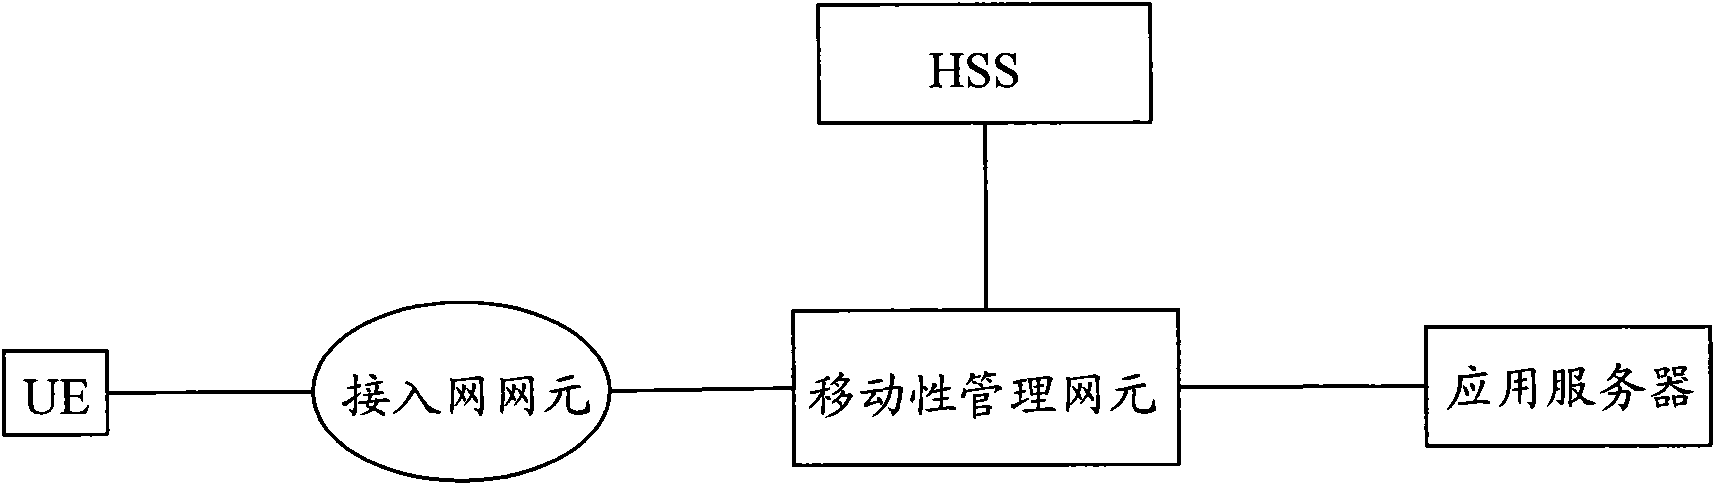 Network access control method, access control equipment and network access system